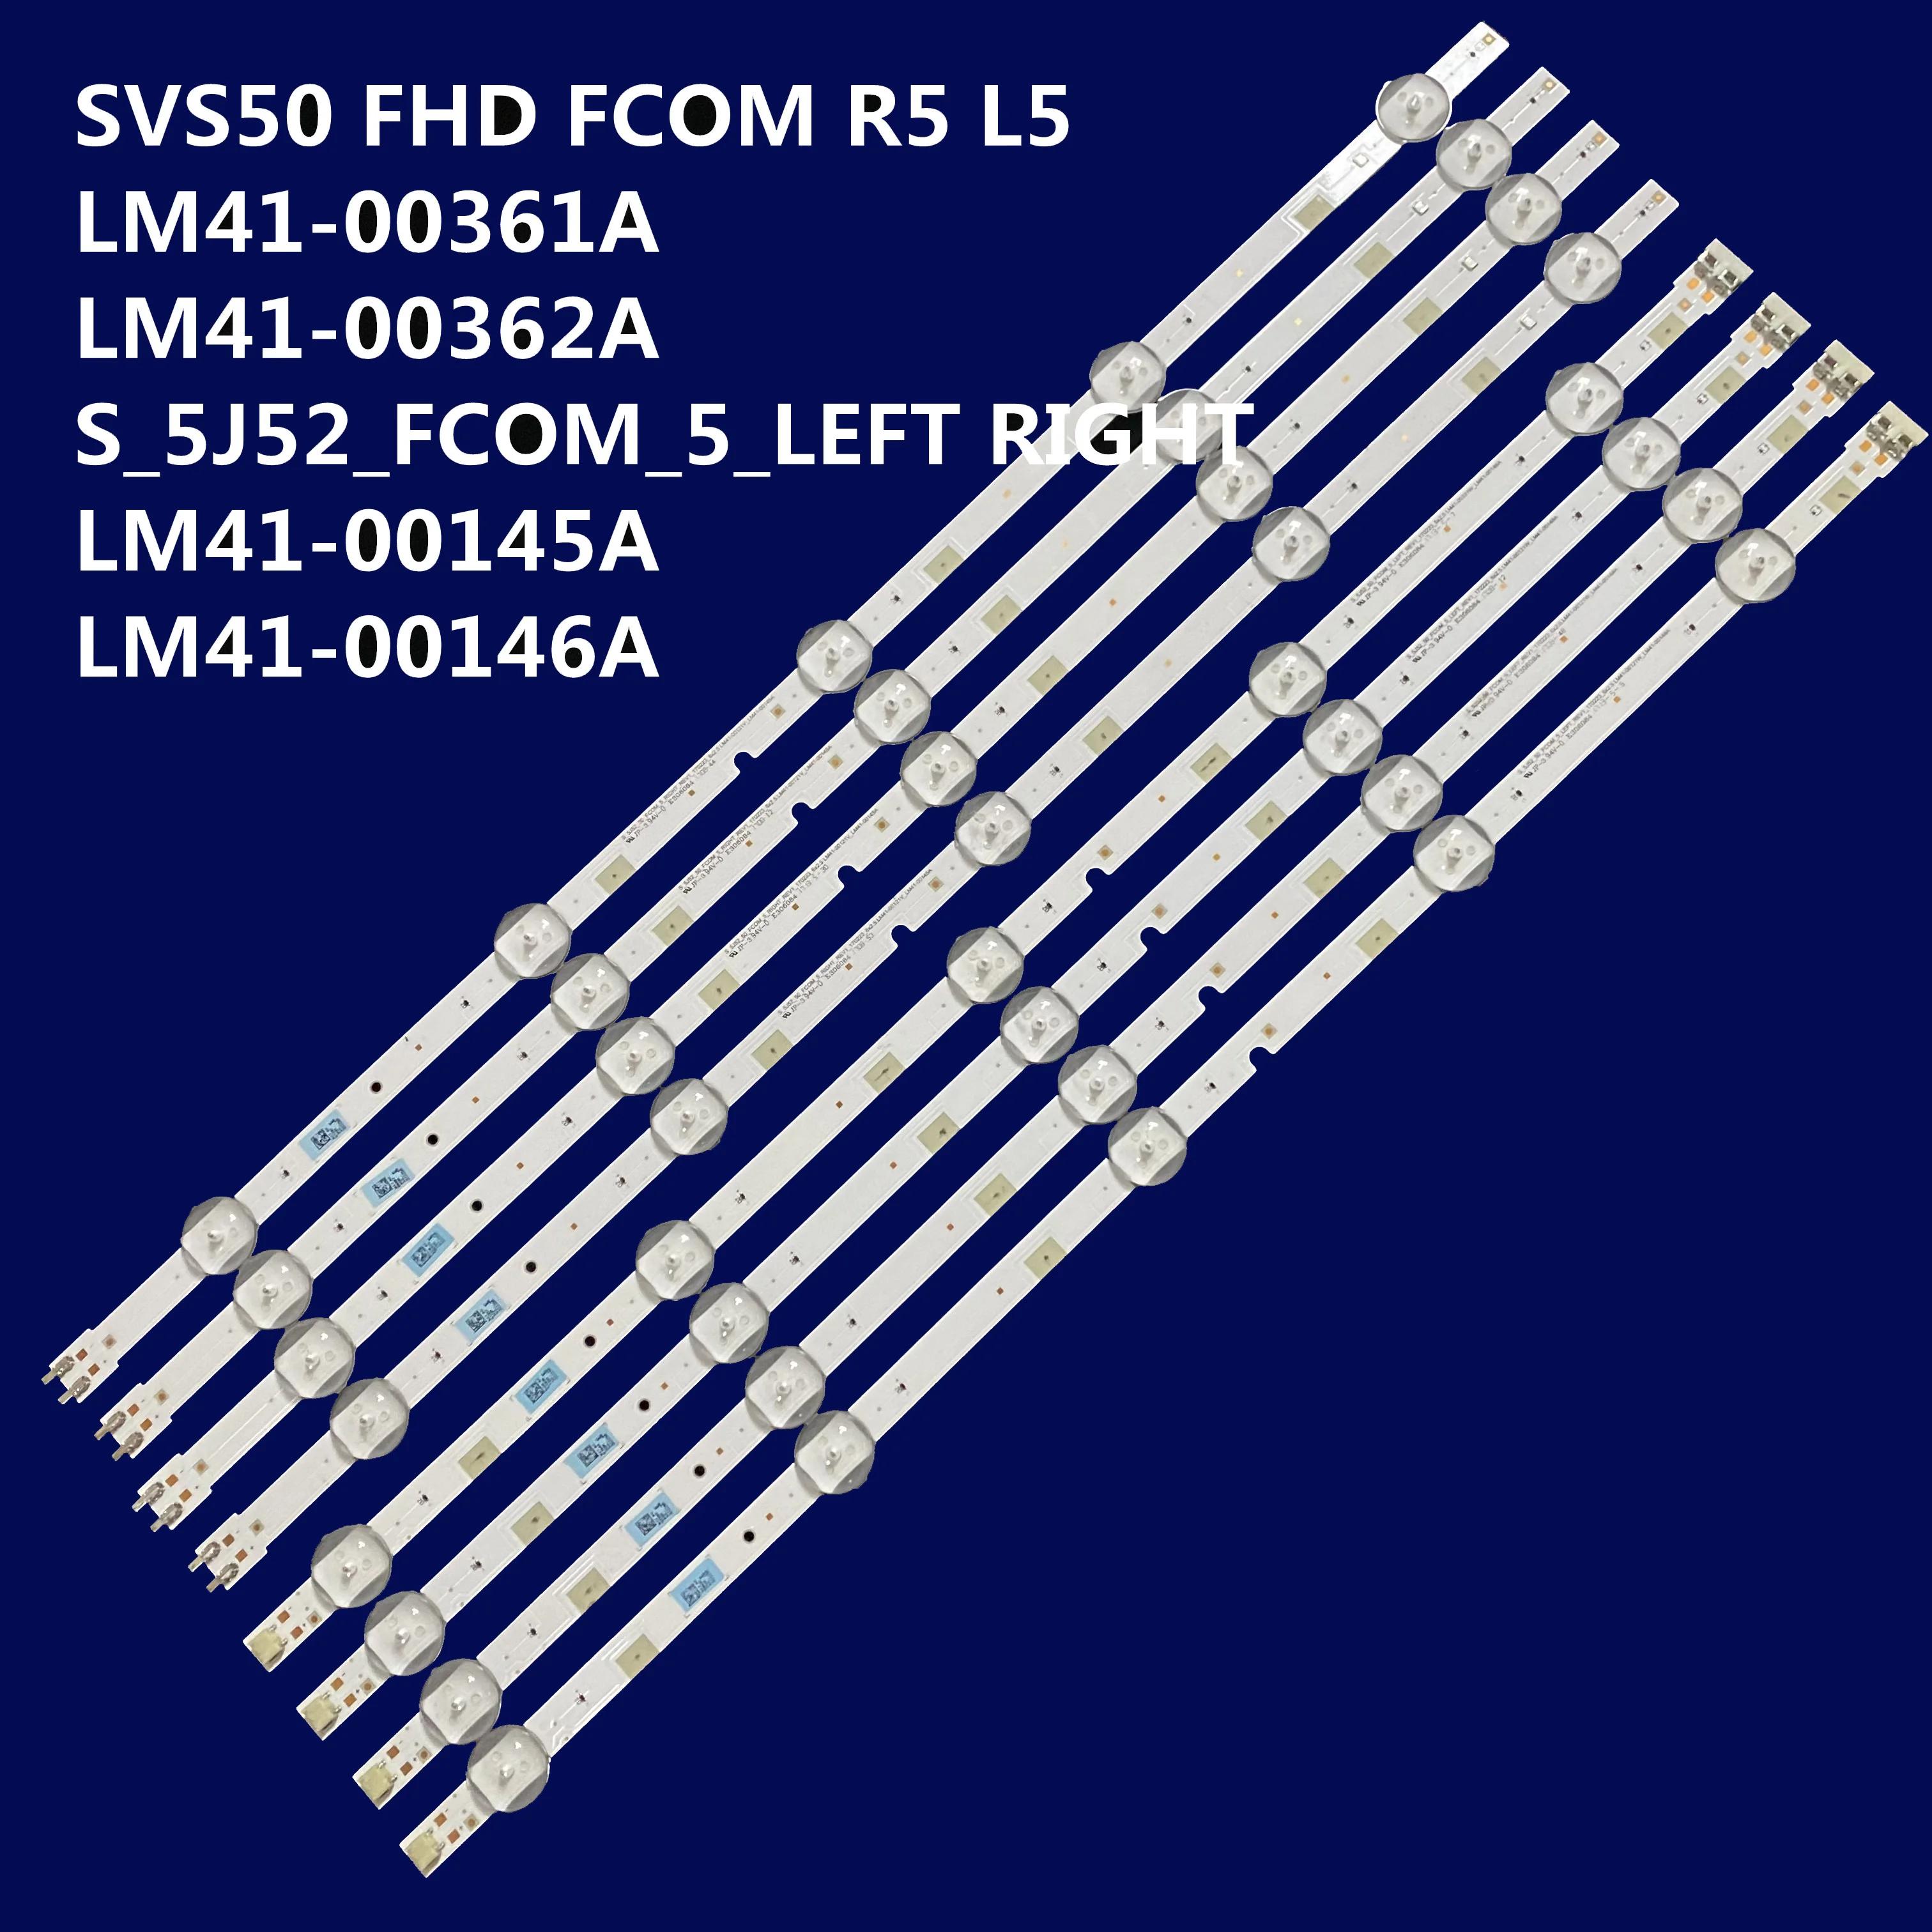 LED Ʈ, UN49J5200 SVS50 FHD FCOM R5 L5 LM41-00361A LM41-00362A S_5J52_FCOM_5_LEFT  LM41-00145A LM41-00146A, 50 